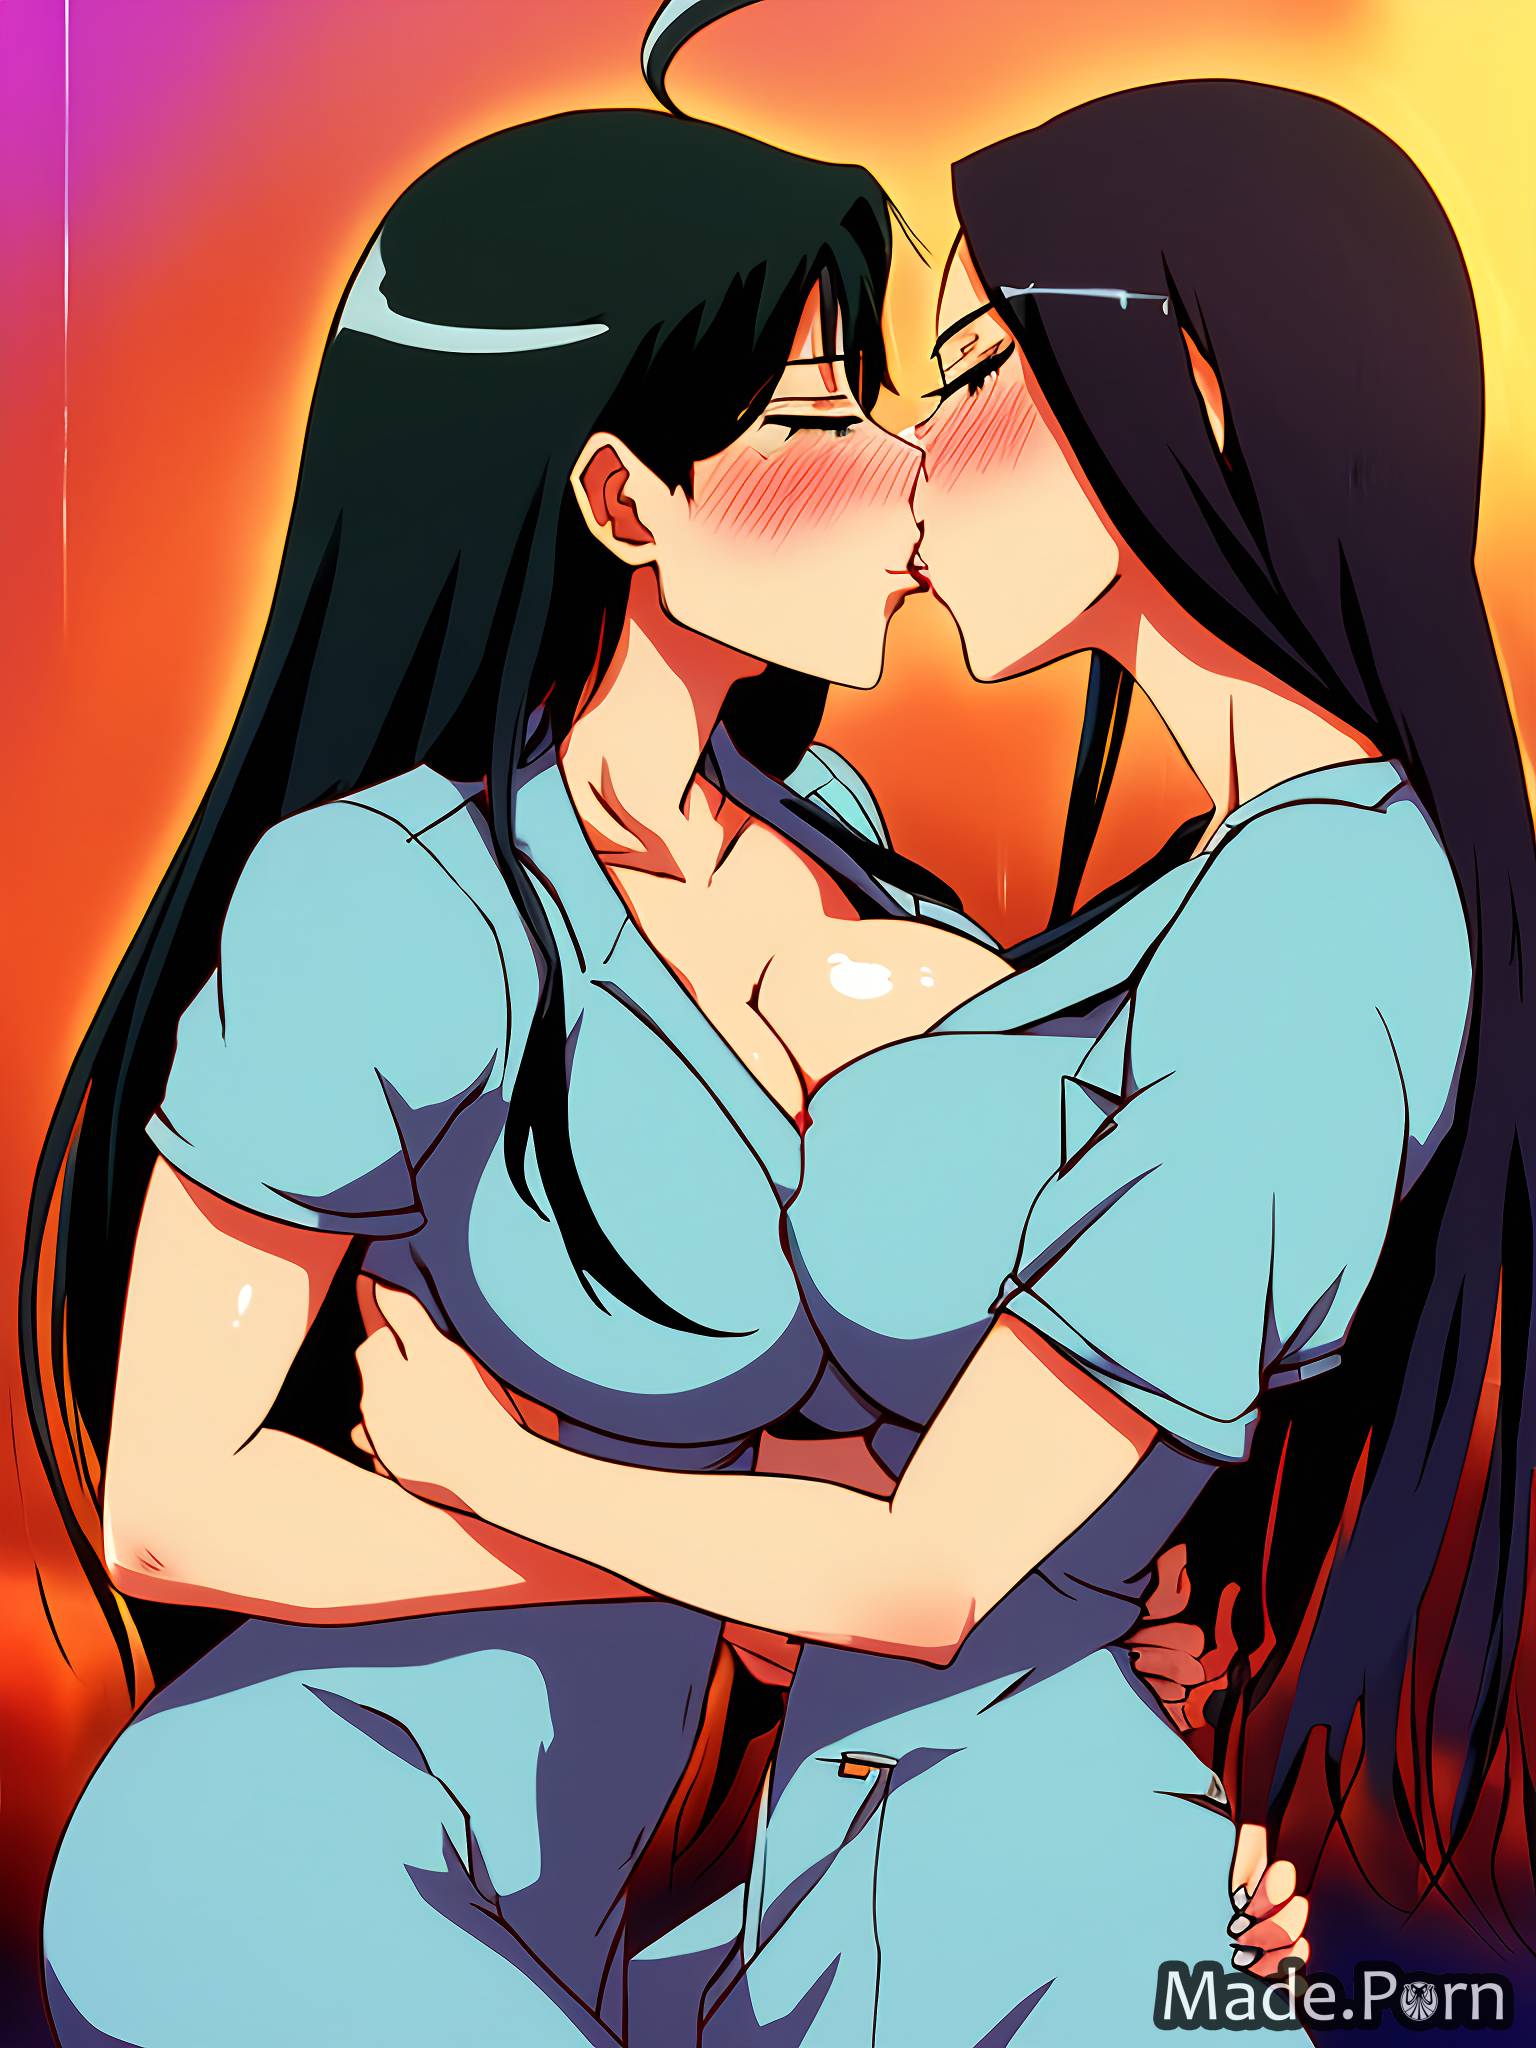 Black Anime Lesbian Porn - Porn image of fully clothed black hair lesbian huge boobs anime 20 doctor  kissing created by AI